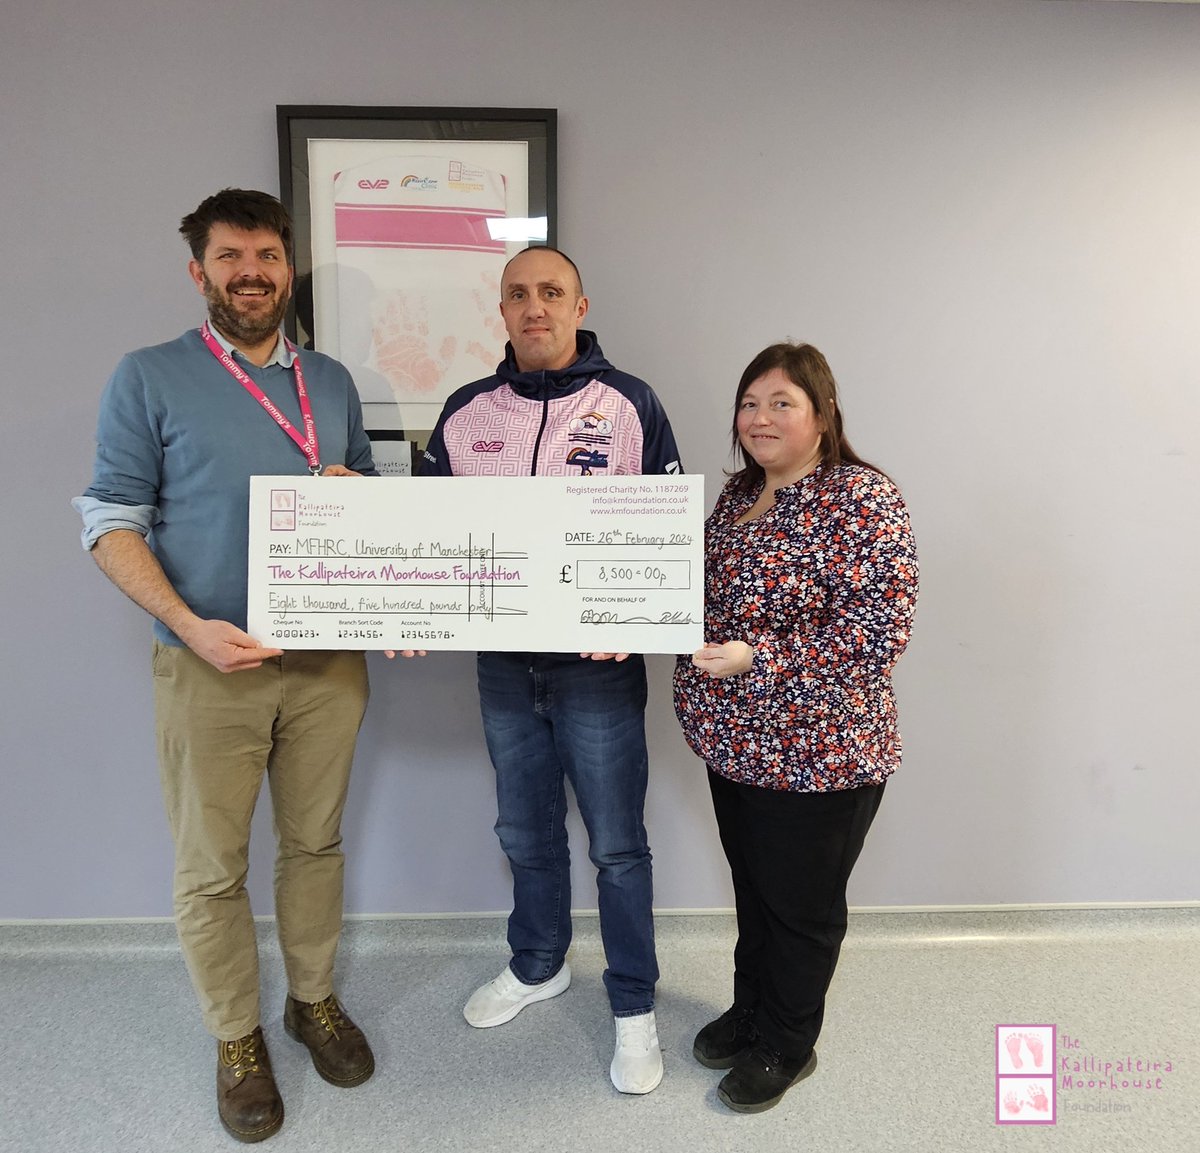 Today, we presented our next donation of £8,500 to @MCR_SB_Research at @MFH_Research in Manchester at Saint Mary’s Hospital. More to come on this story. Thank you for your support!